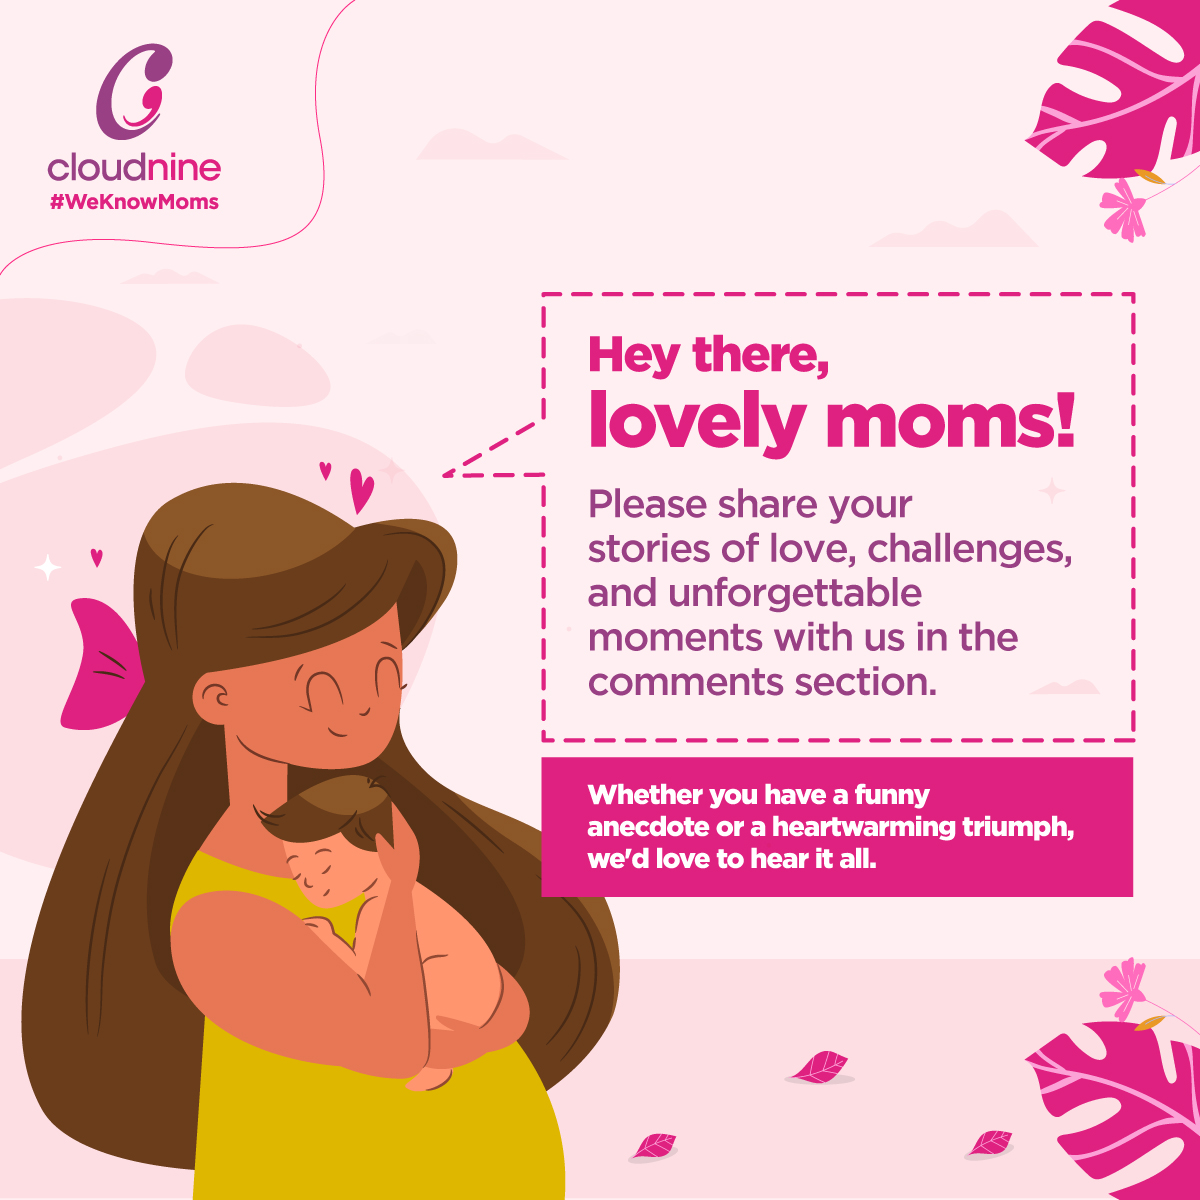 🤰Hey there, beautiful moms! We're excited to hear your stories of love, challenges and unforgettable moments. So, please don't hesitate to share them with us in the comments section below. Whether you have a funny anecdote or a heartwarming triumph, we're all ears.👩‍👧‍👦